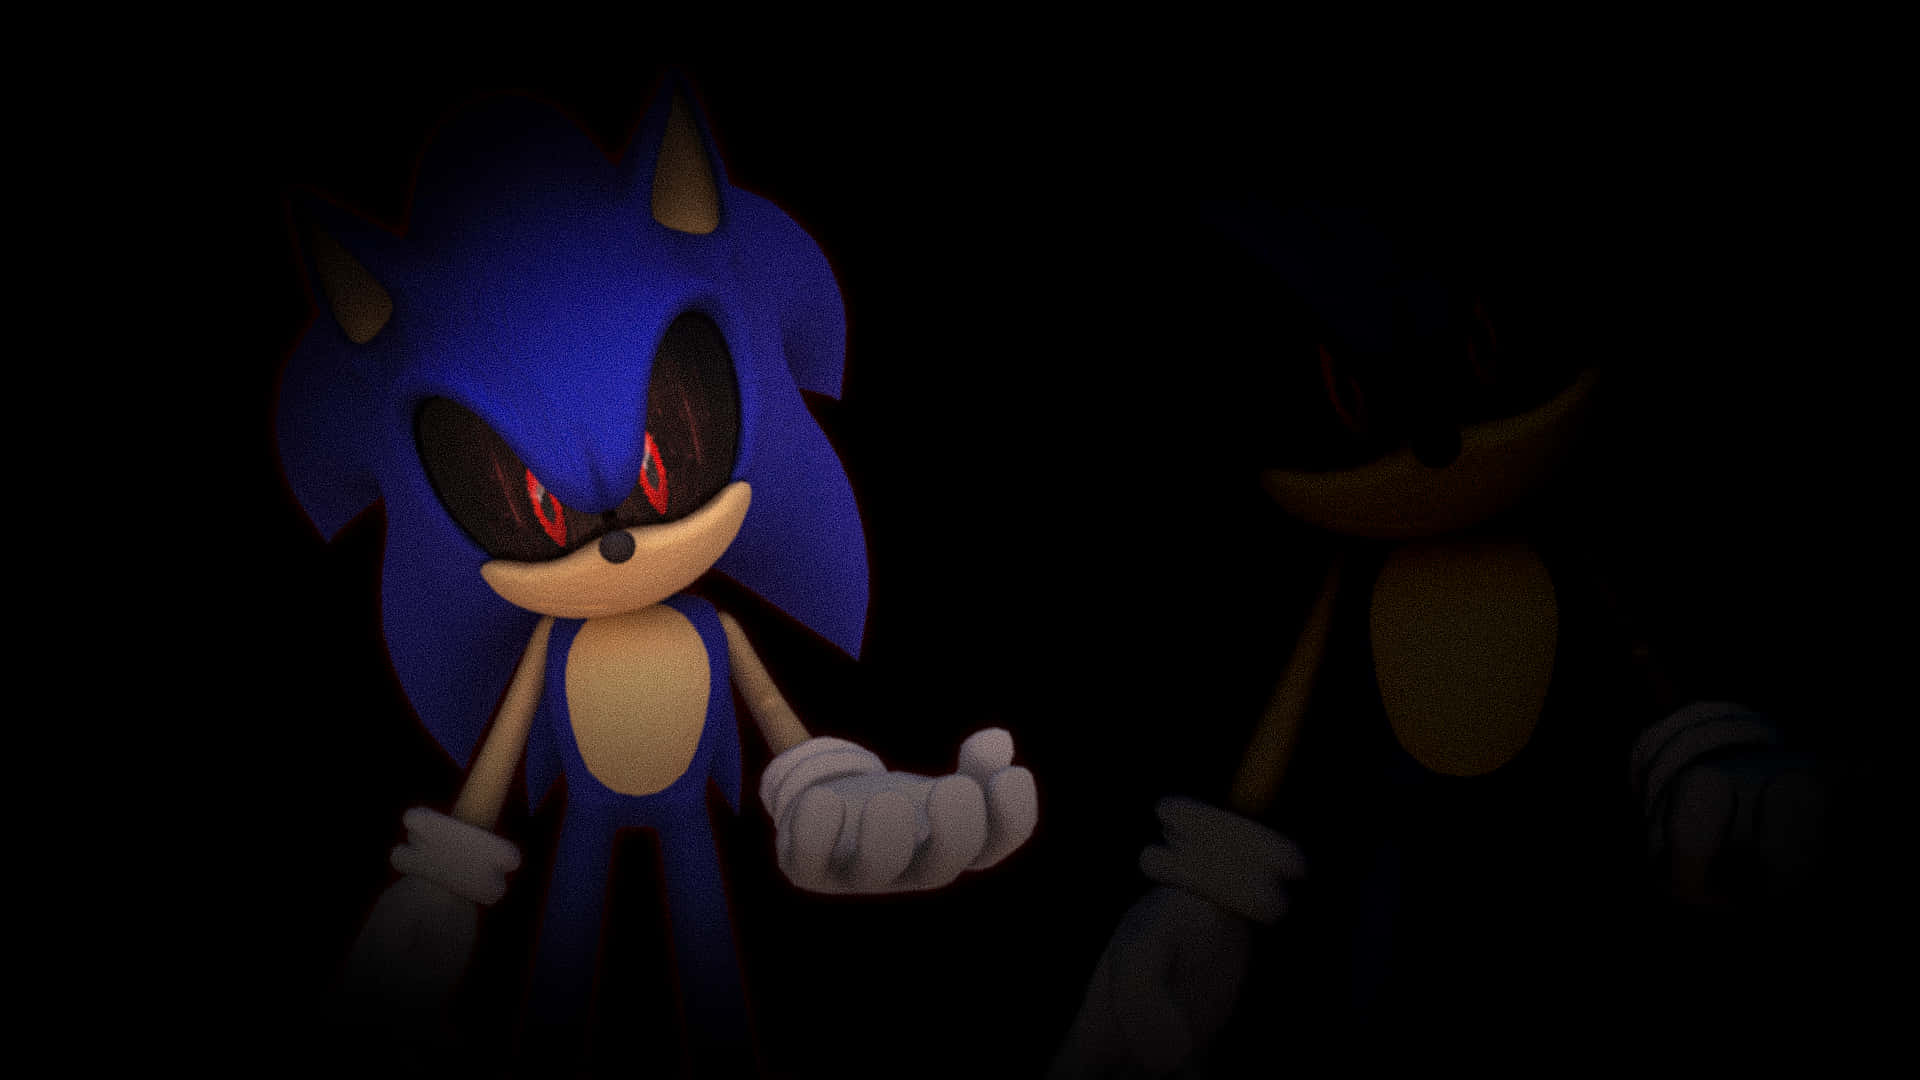 Join in the fun as Sonic seeks out his friends in the spooky forest! Wallpaper